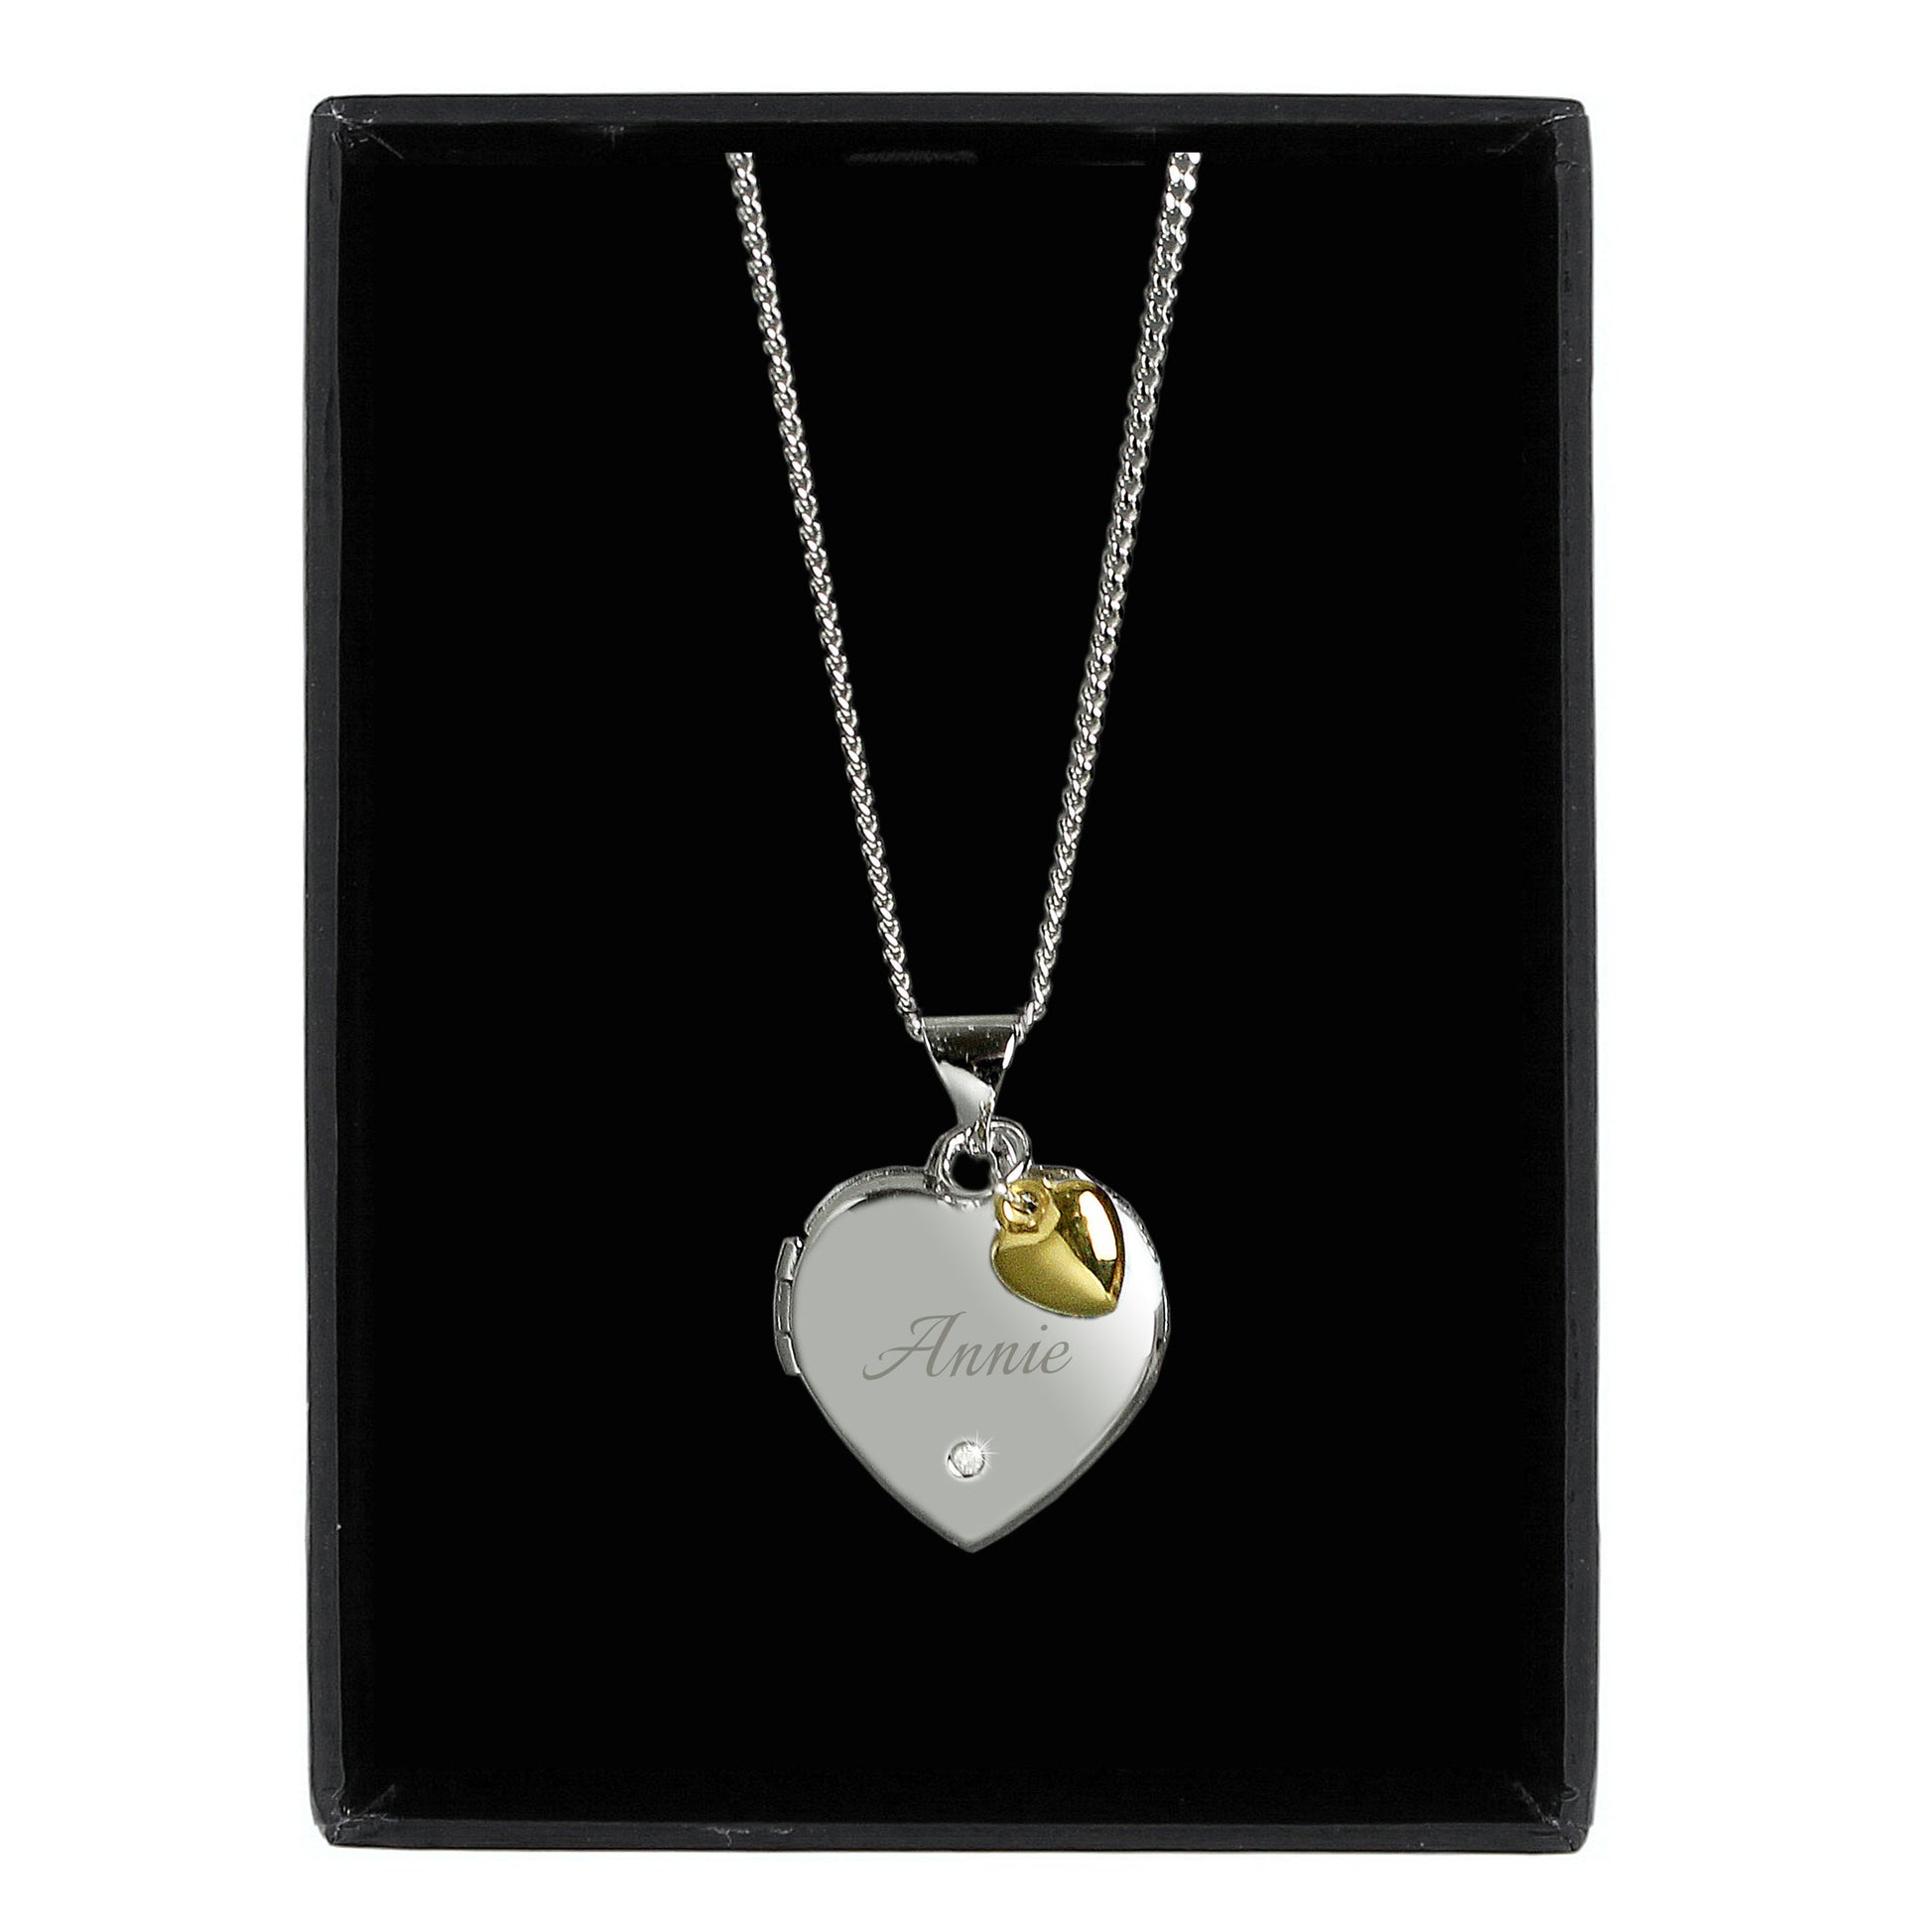 heart shaped locket with a tiny diamante on the front and engraved with a name of your choice in script font. The locket carries a tiny gold plated heart. The locket can take up to two photos. Sterling silver chain.